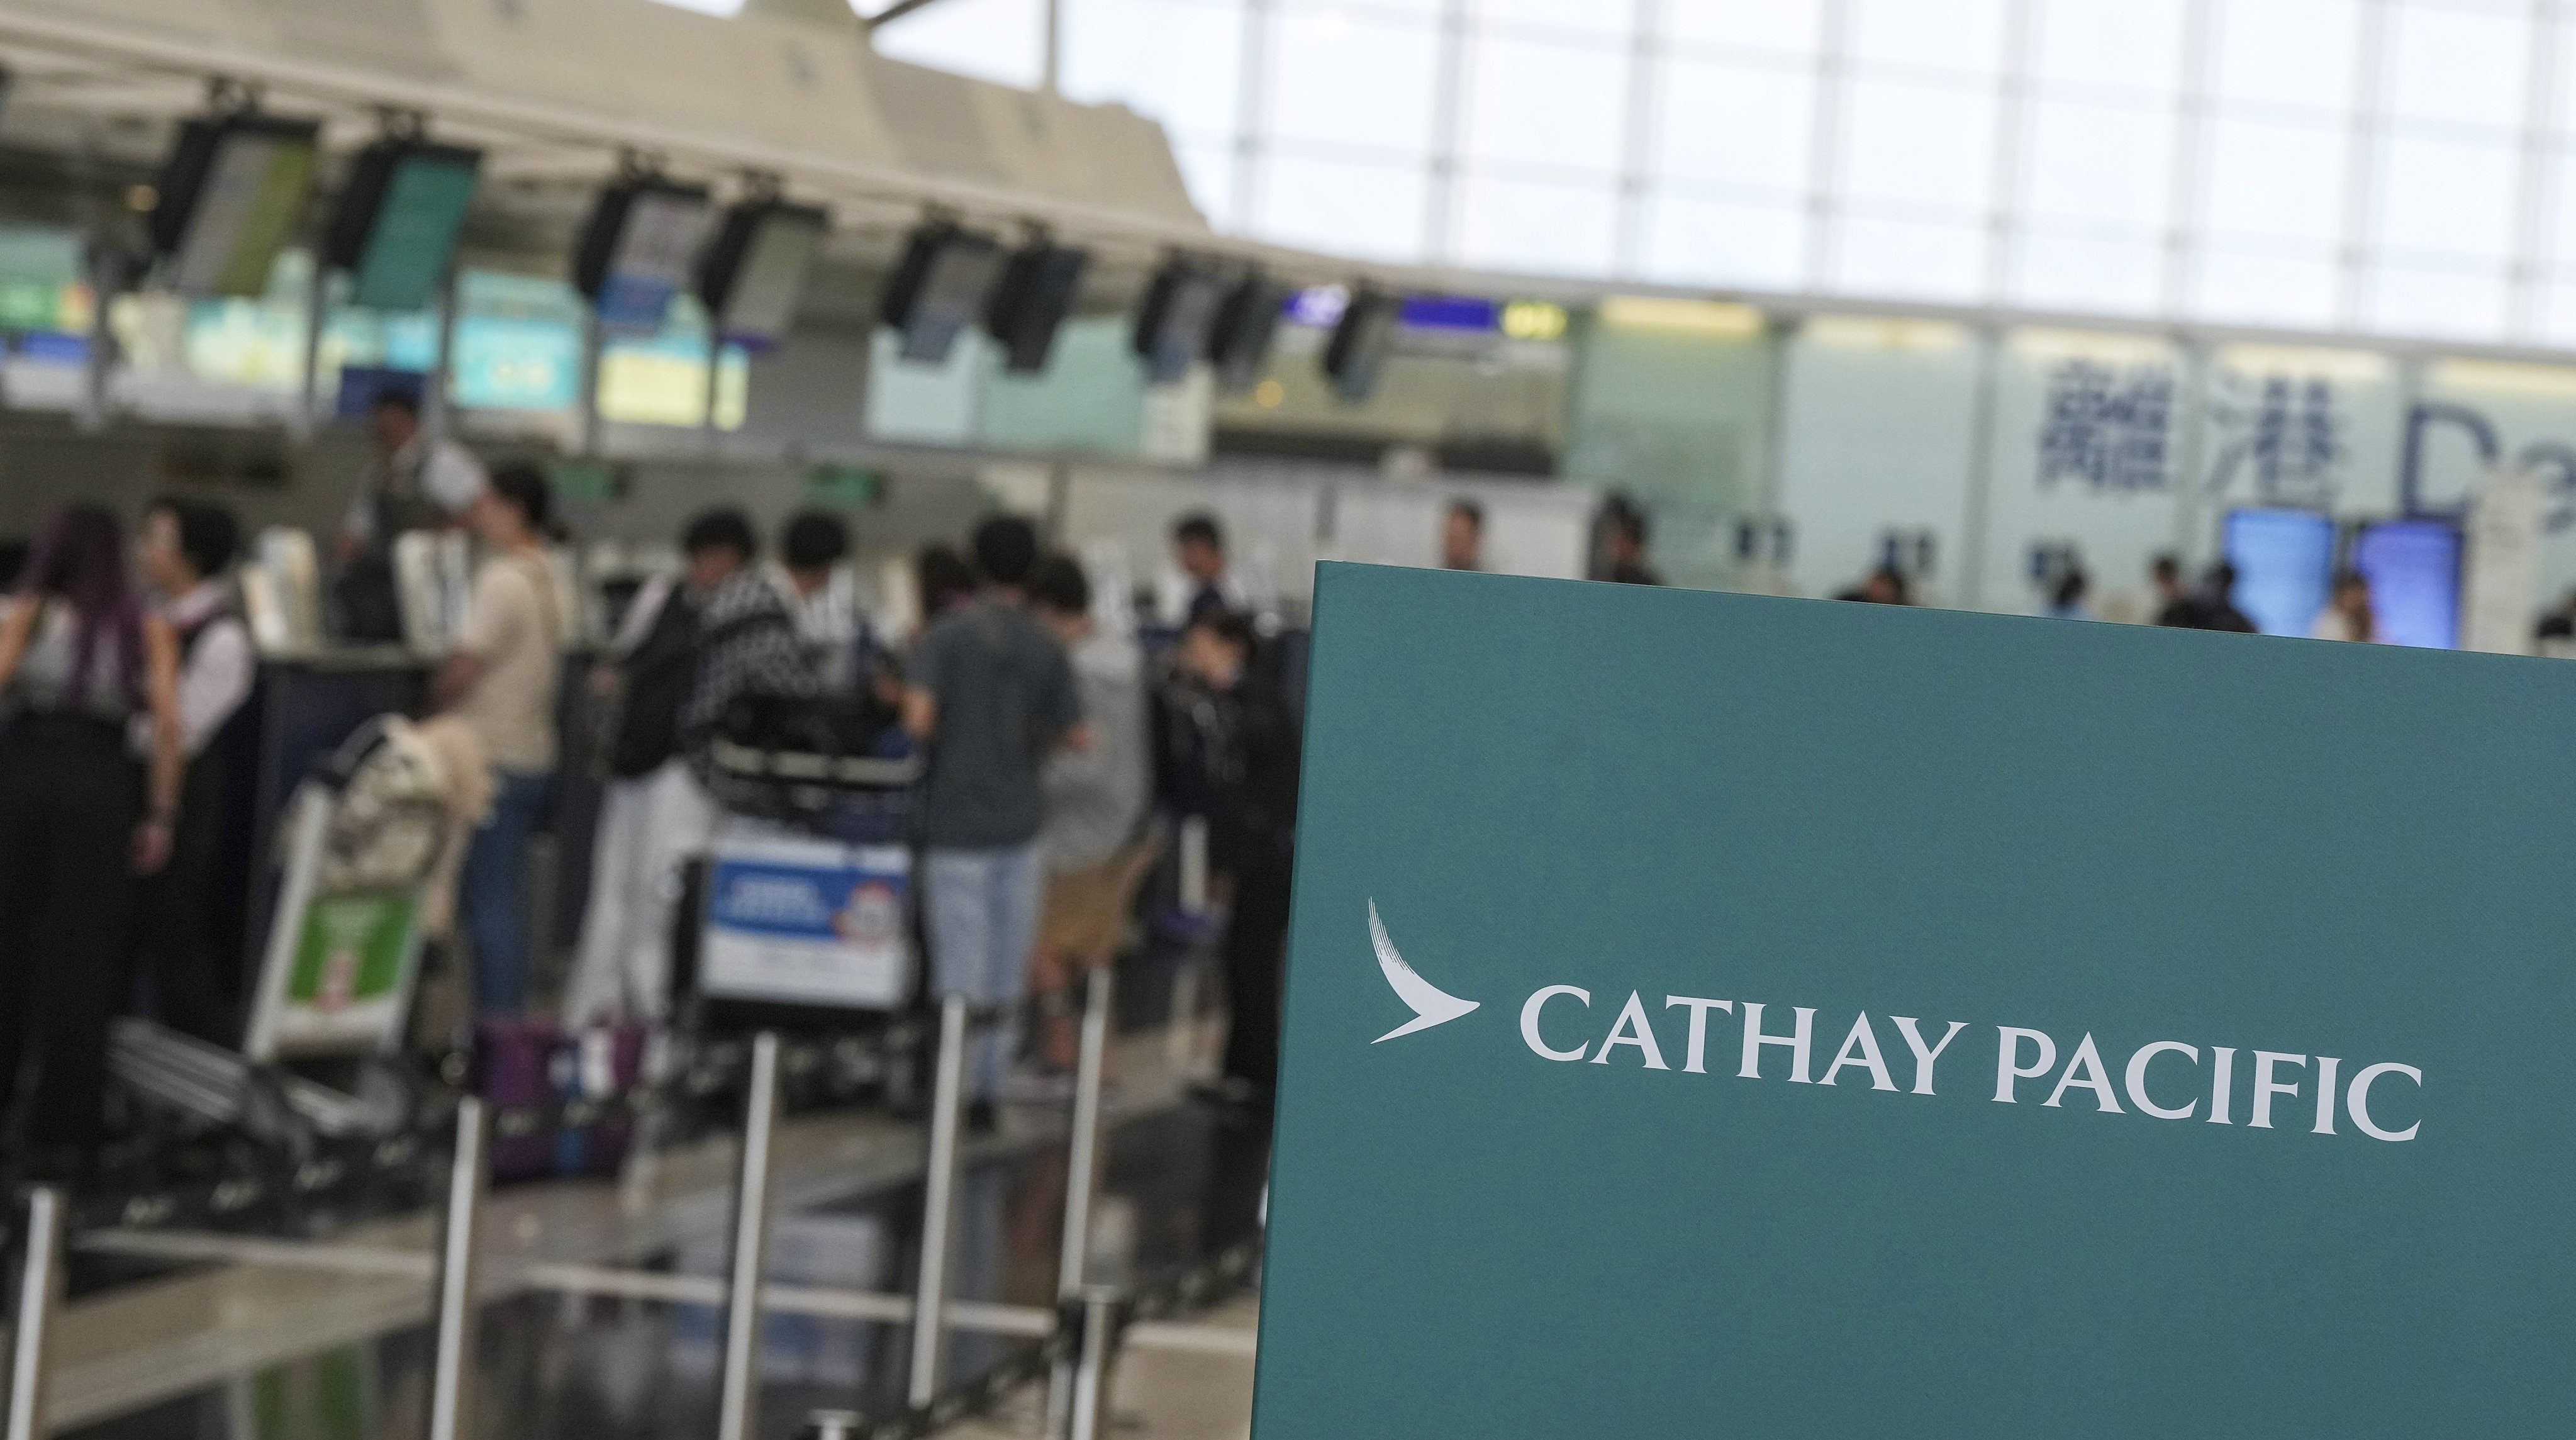 Passengers check in at Cathay Pacific counters at Hong Kong airport on August 9. Photo: Elson Li